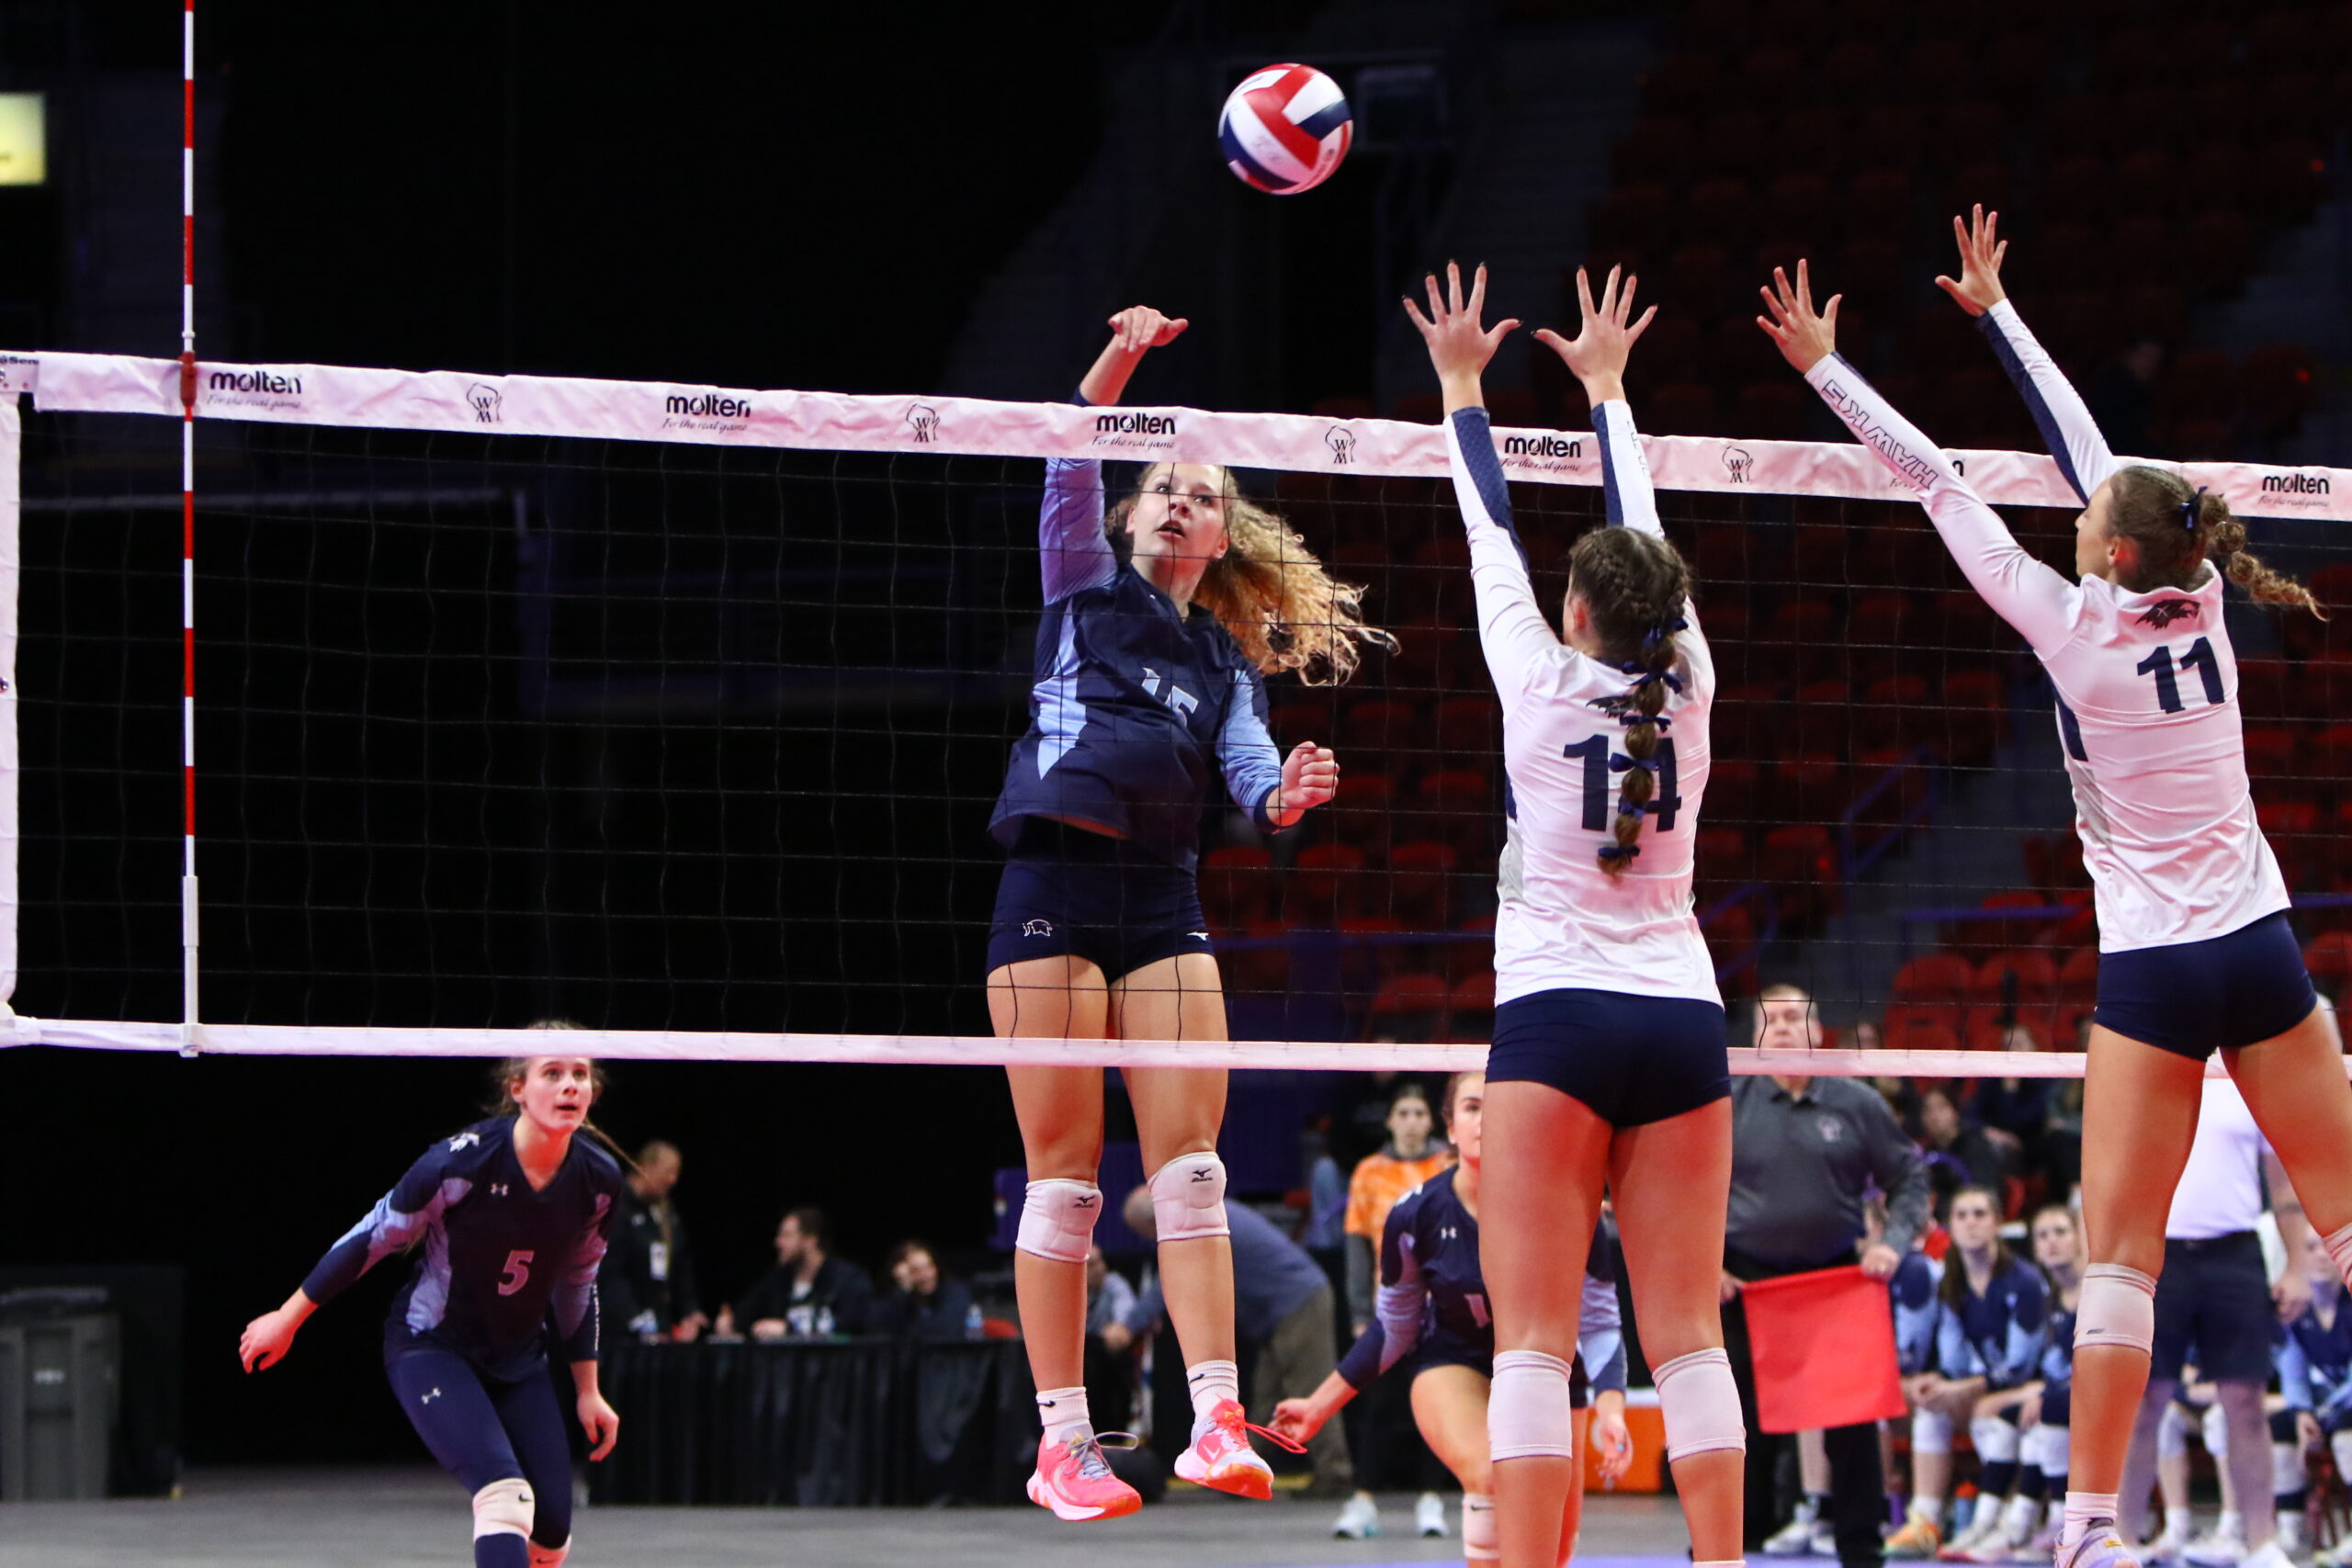 High school girls volleyball expands to 5 divisions, underscoring popularity in Wisconsin